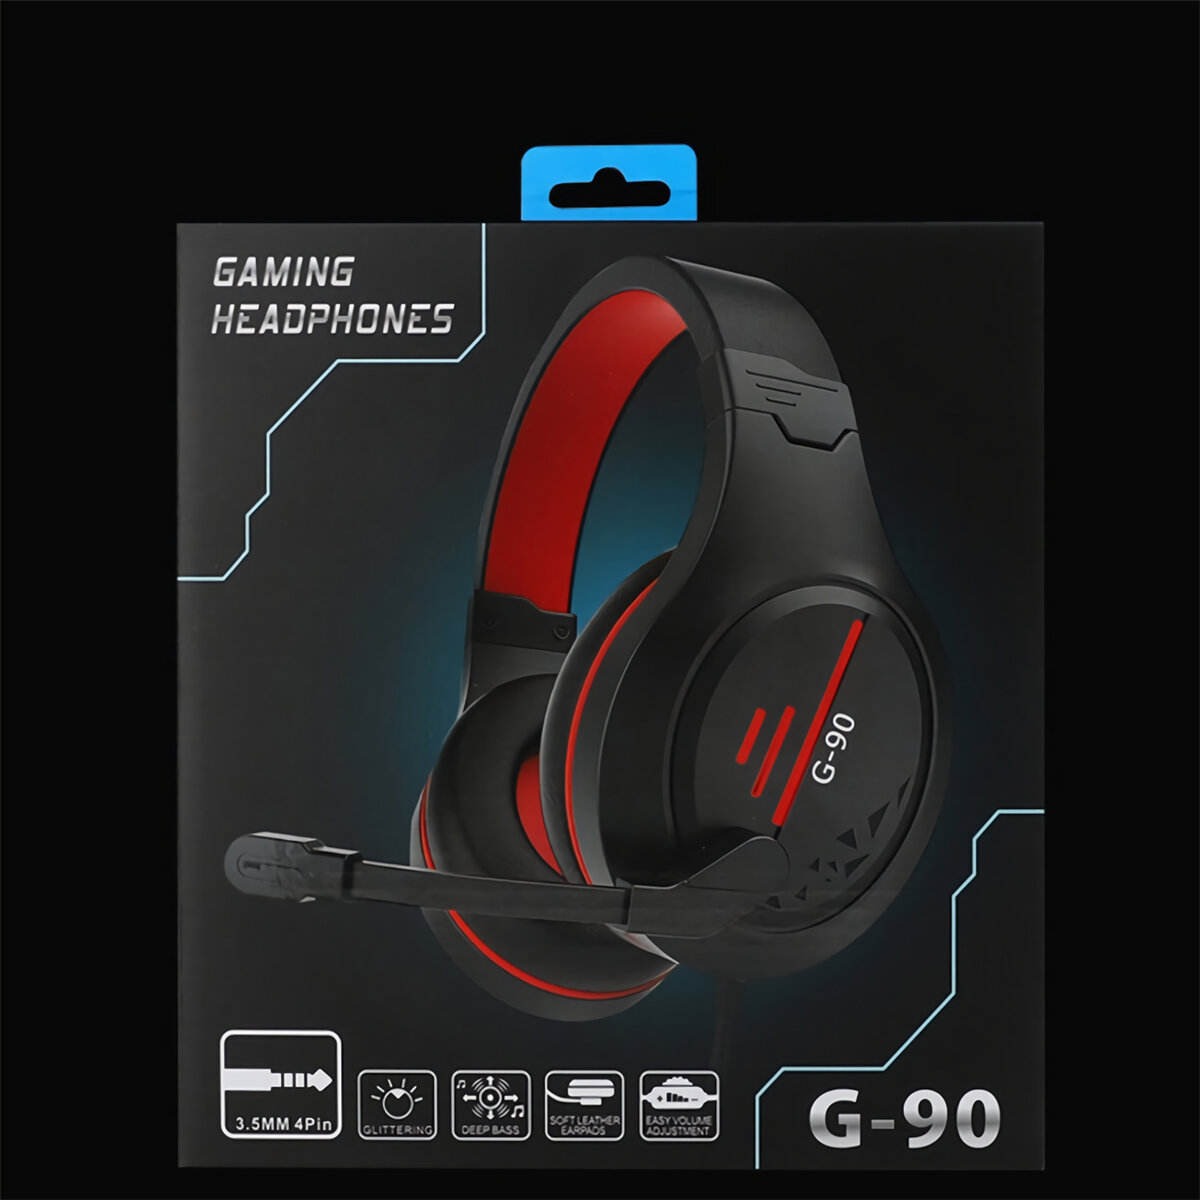 G90 gaming headset - G90 Gaming Headphone High Quality Voice Head Set Support All Devices - G90 Gaming Stereo Headphone